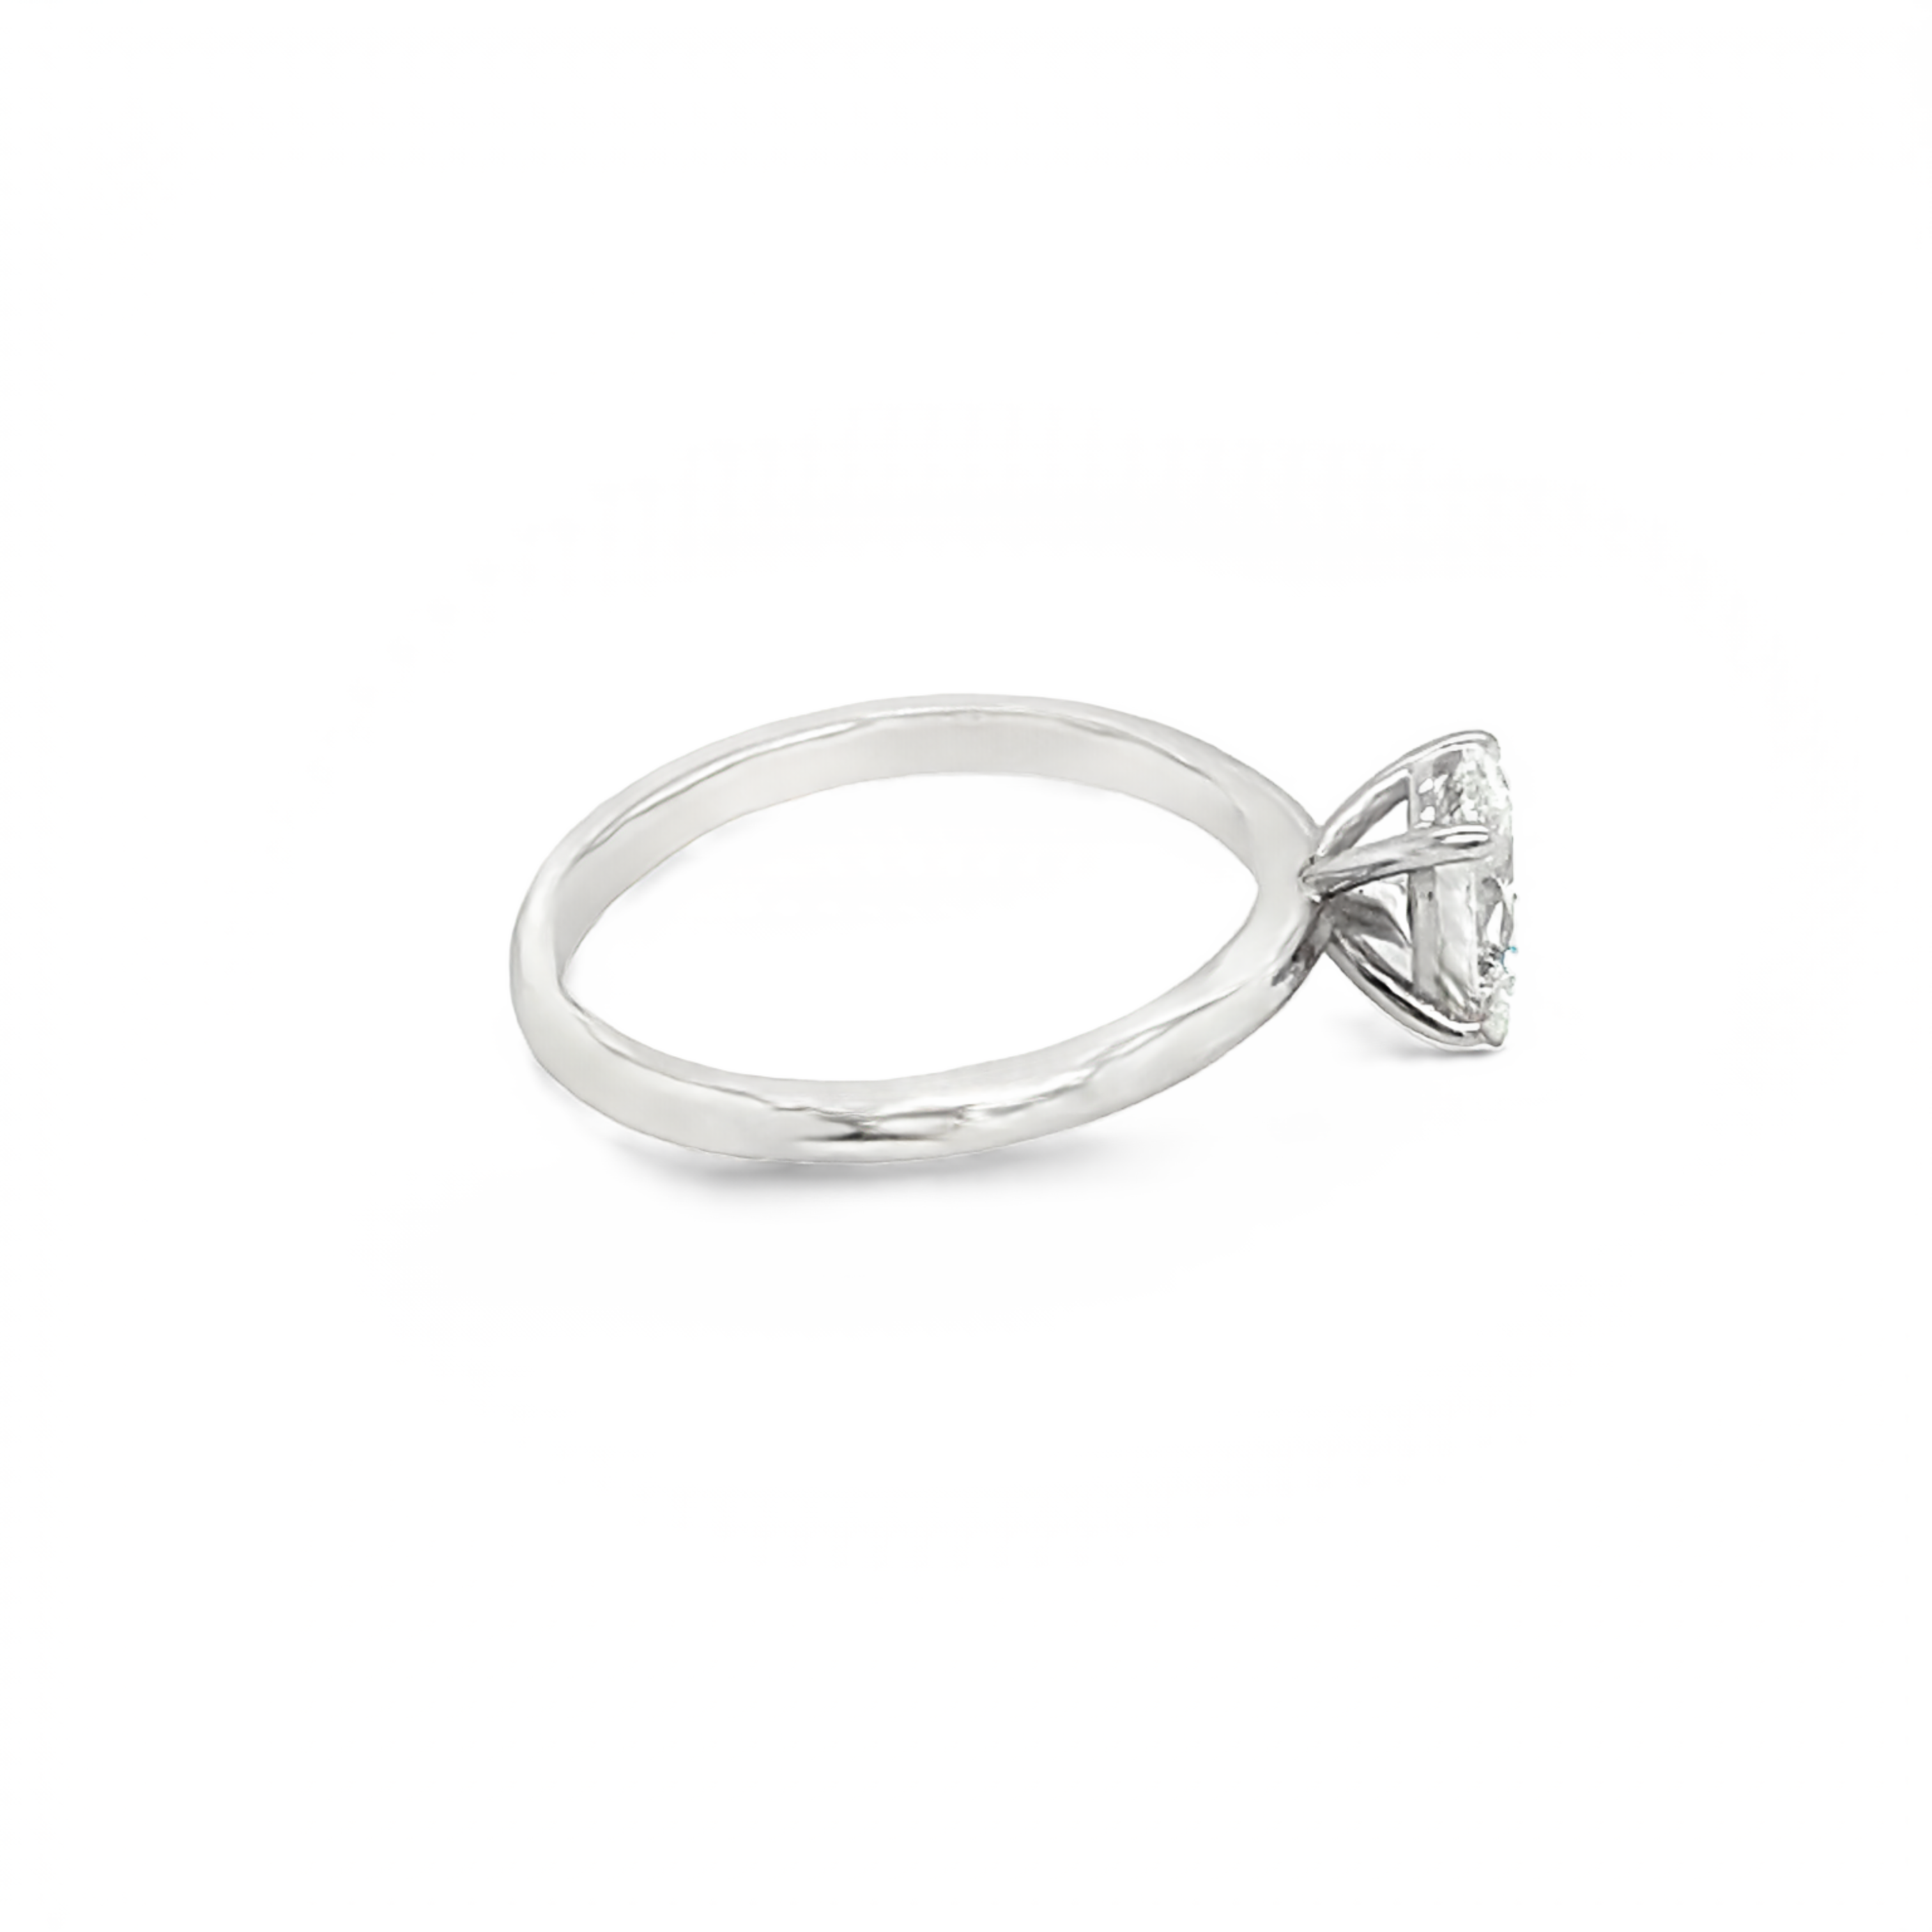 Platinum Four Claw 0.81ct Oval Cut Solitaire Diamond Ring